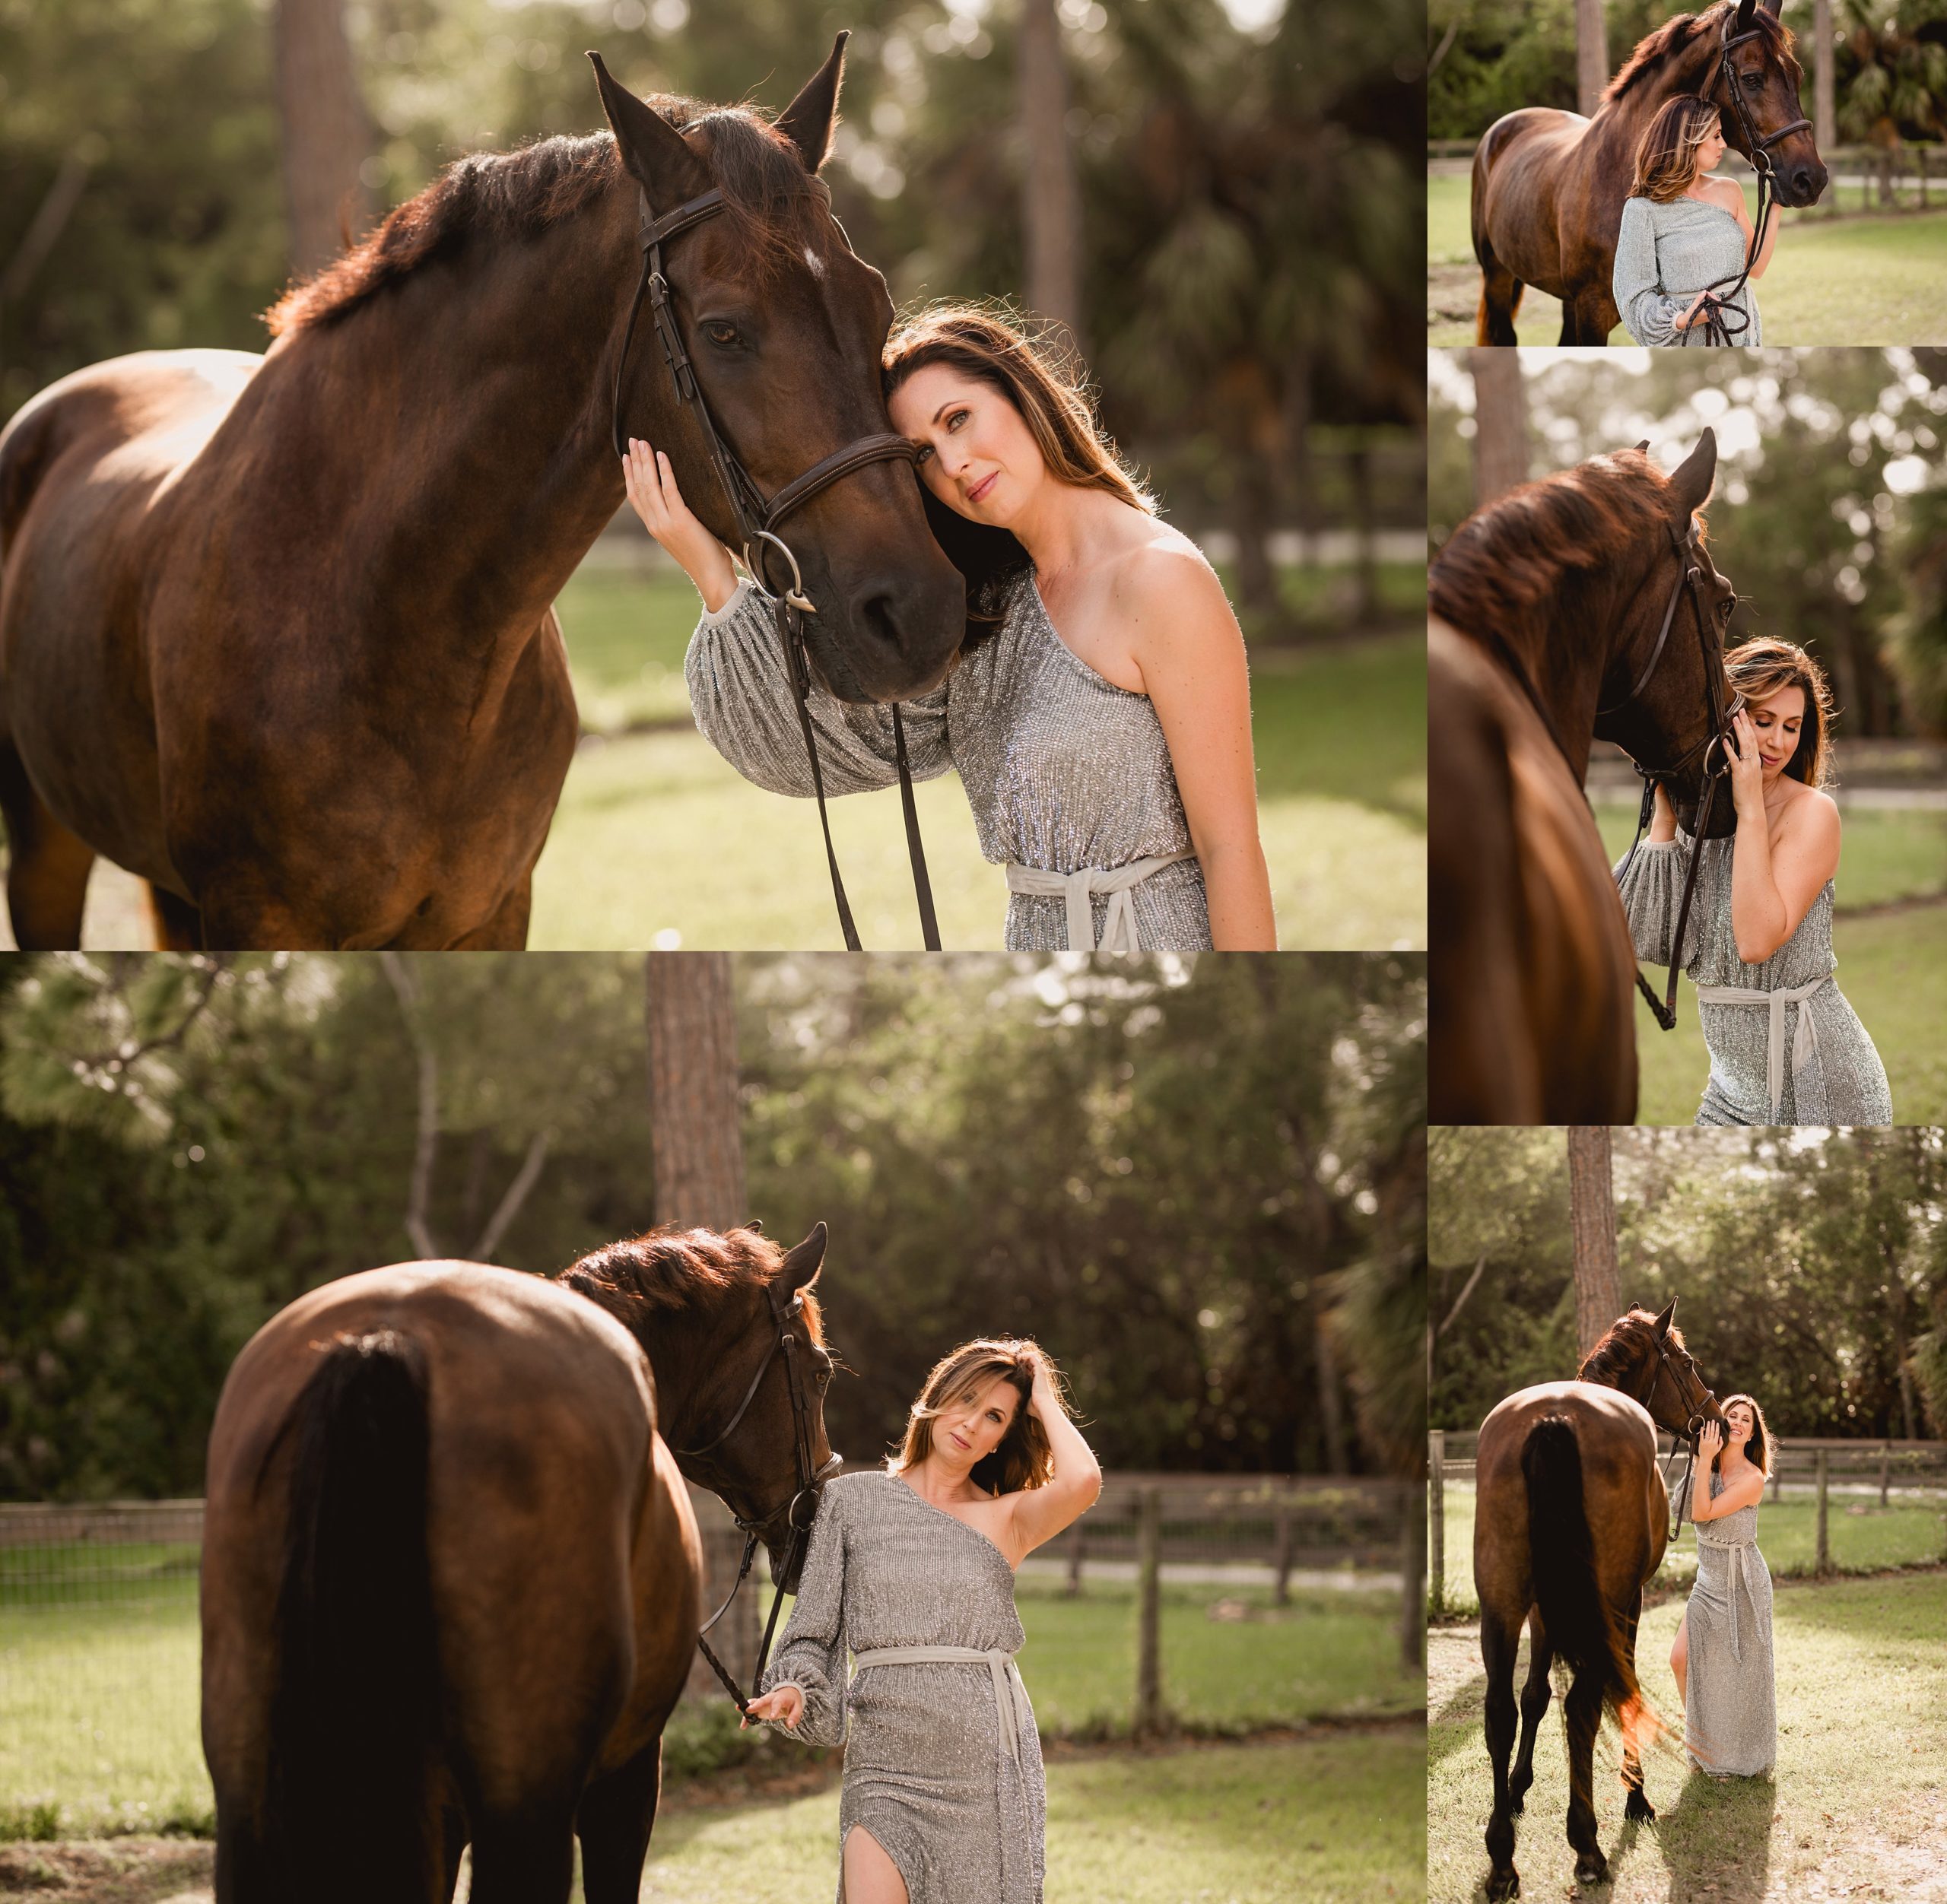 Horse and rider photos inspired by Vogue dress designs.